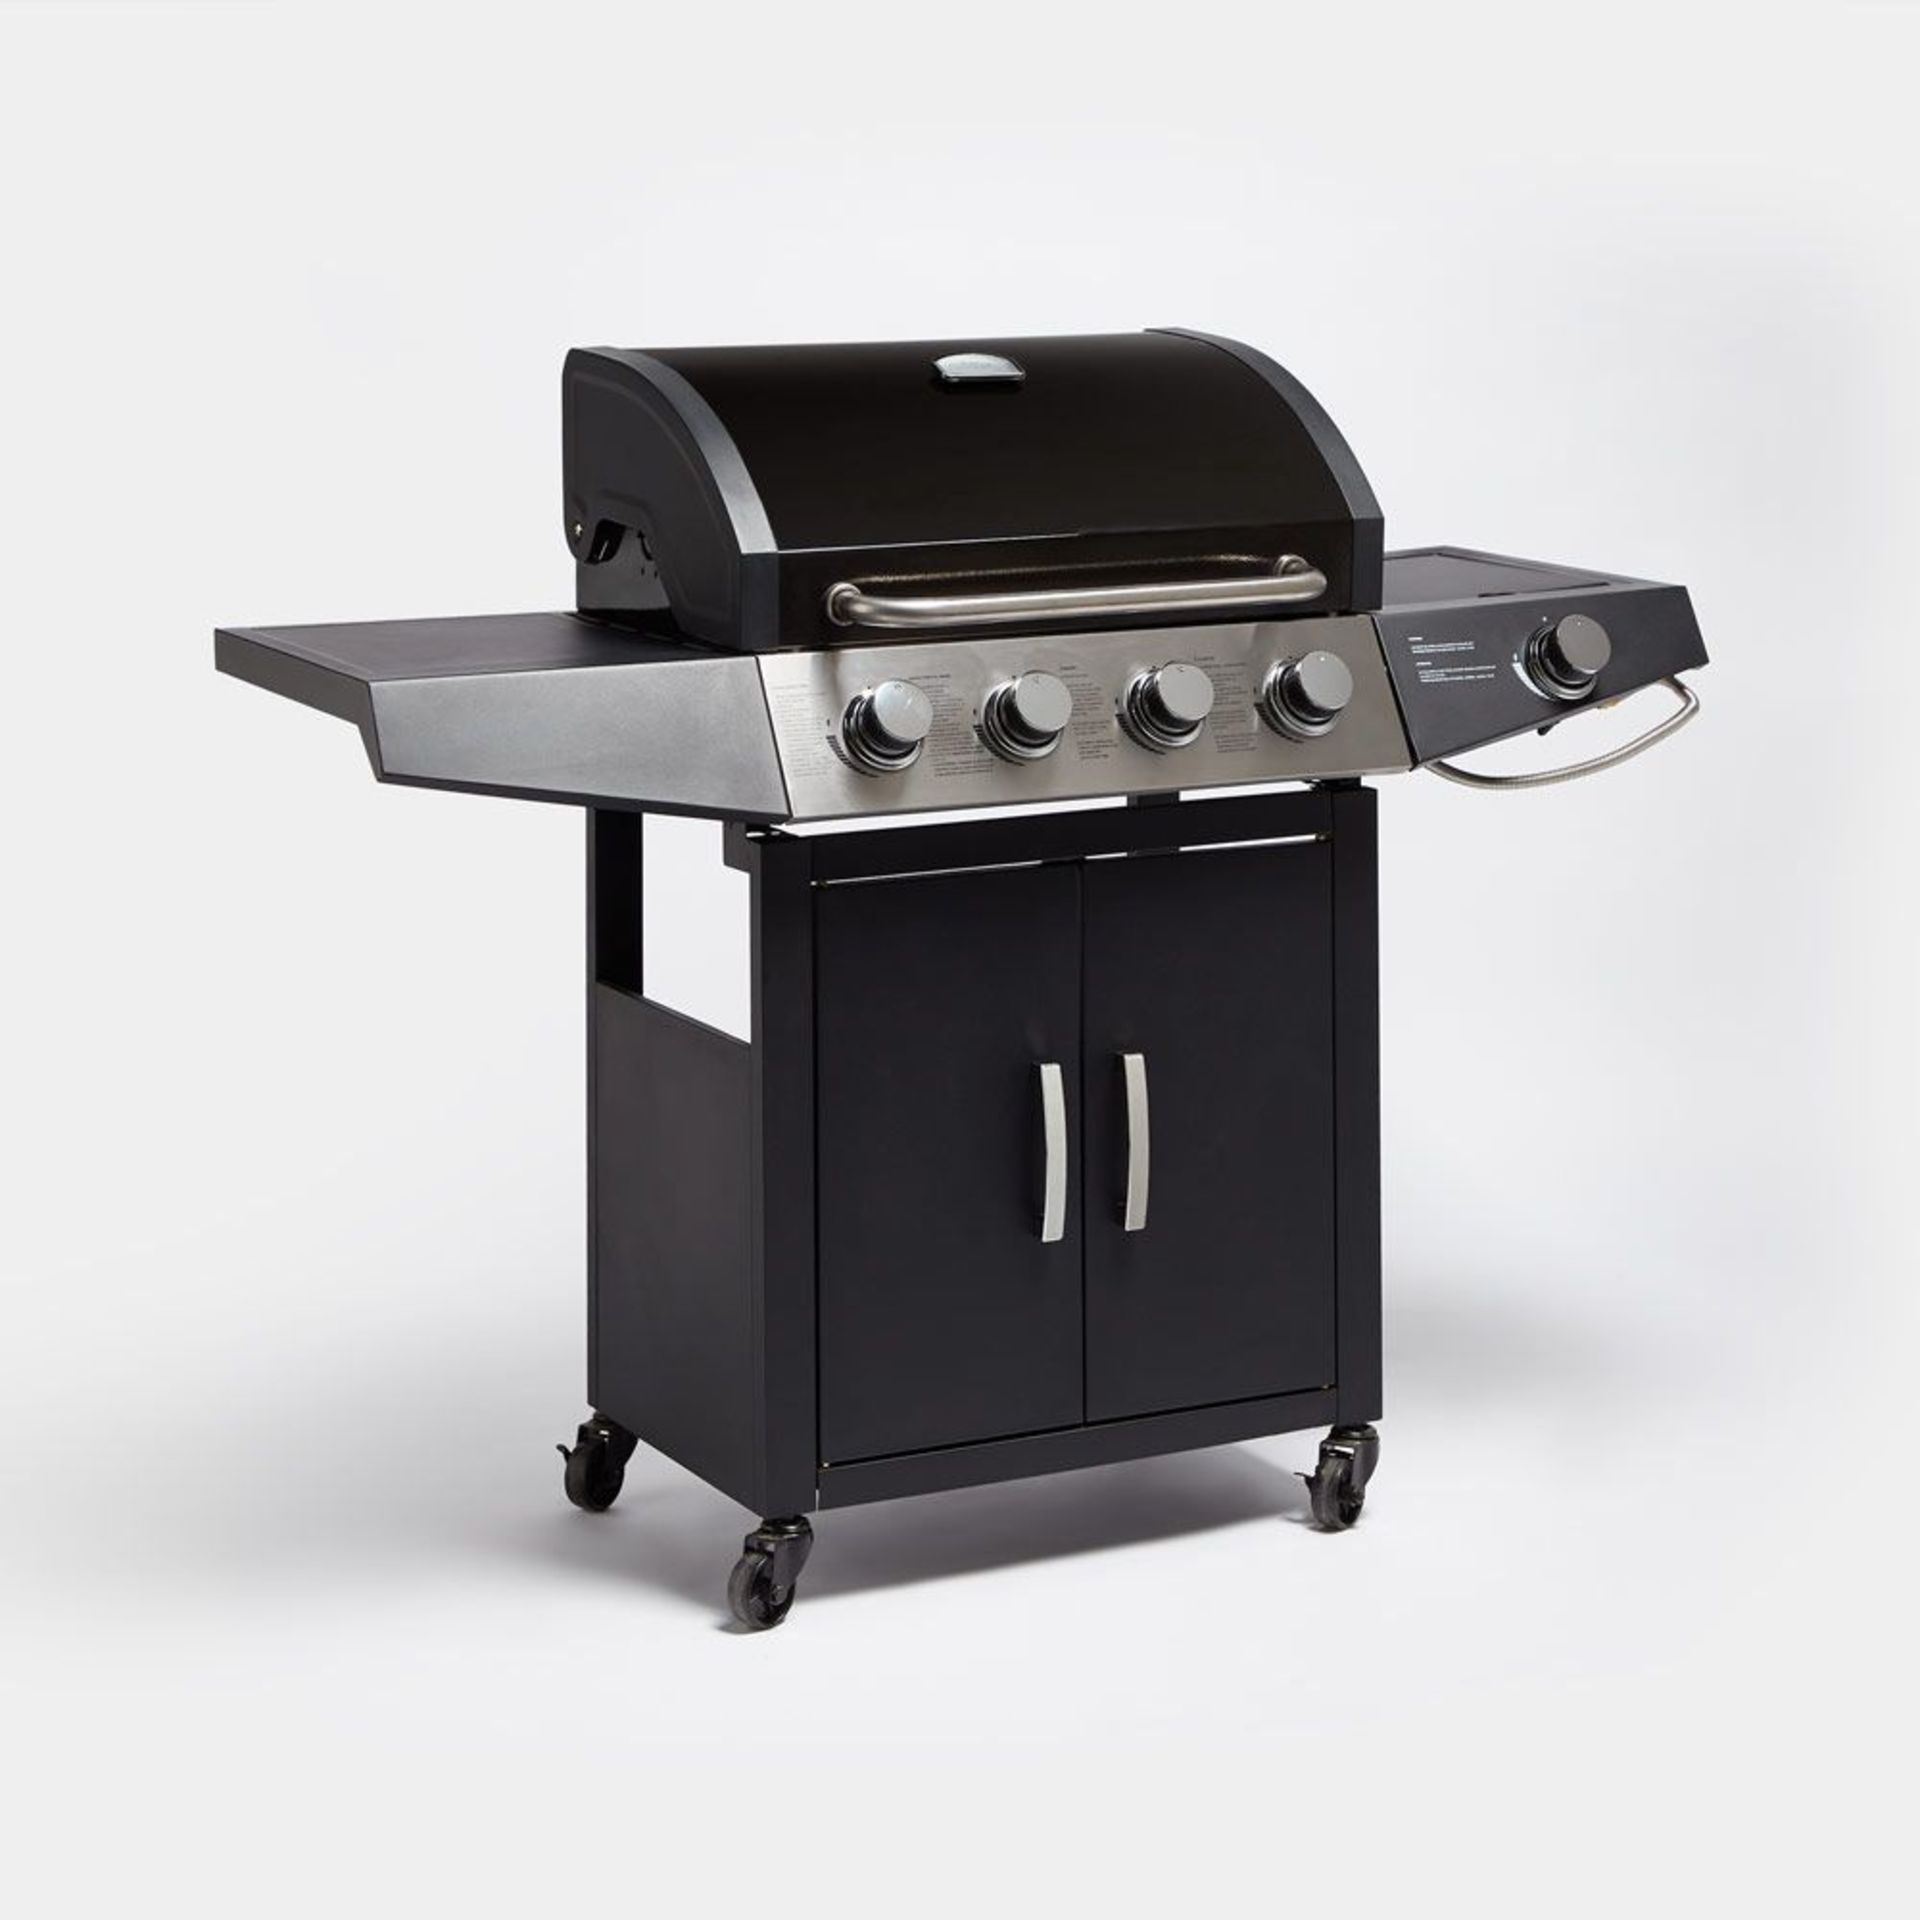 New Boxed - Luxe 4+1 Gas BBQ. Level up your al fresco finding with this large gas BBQ, giving you